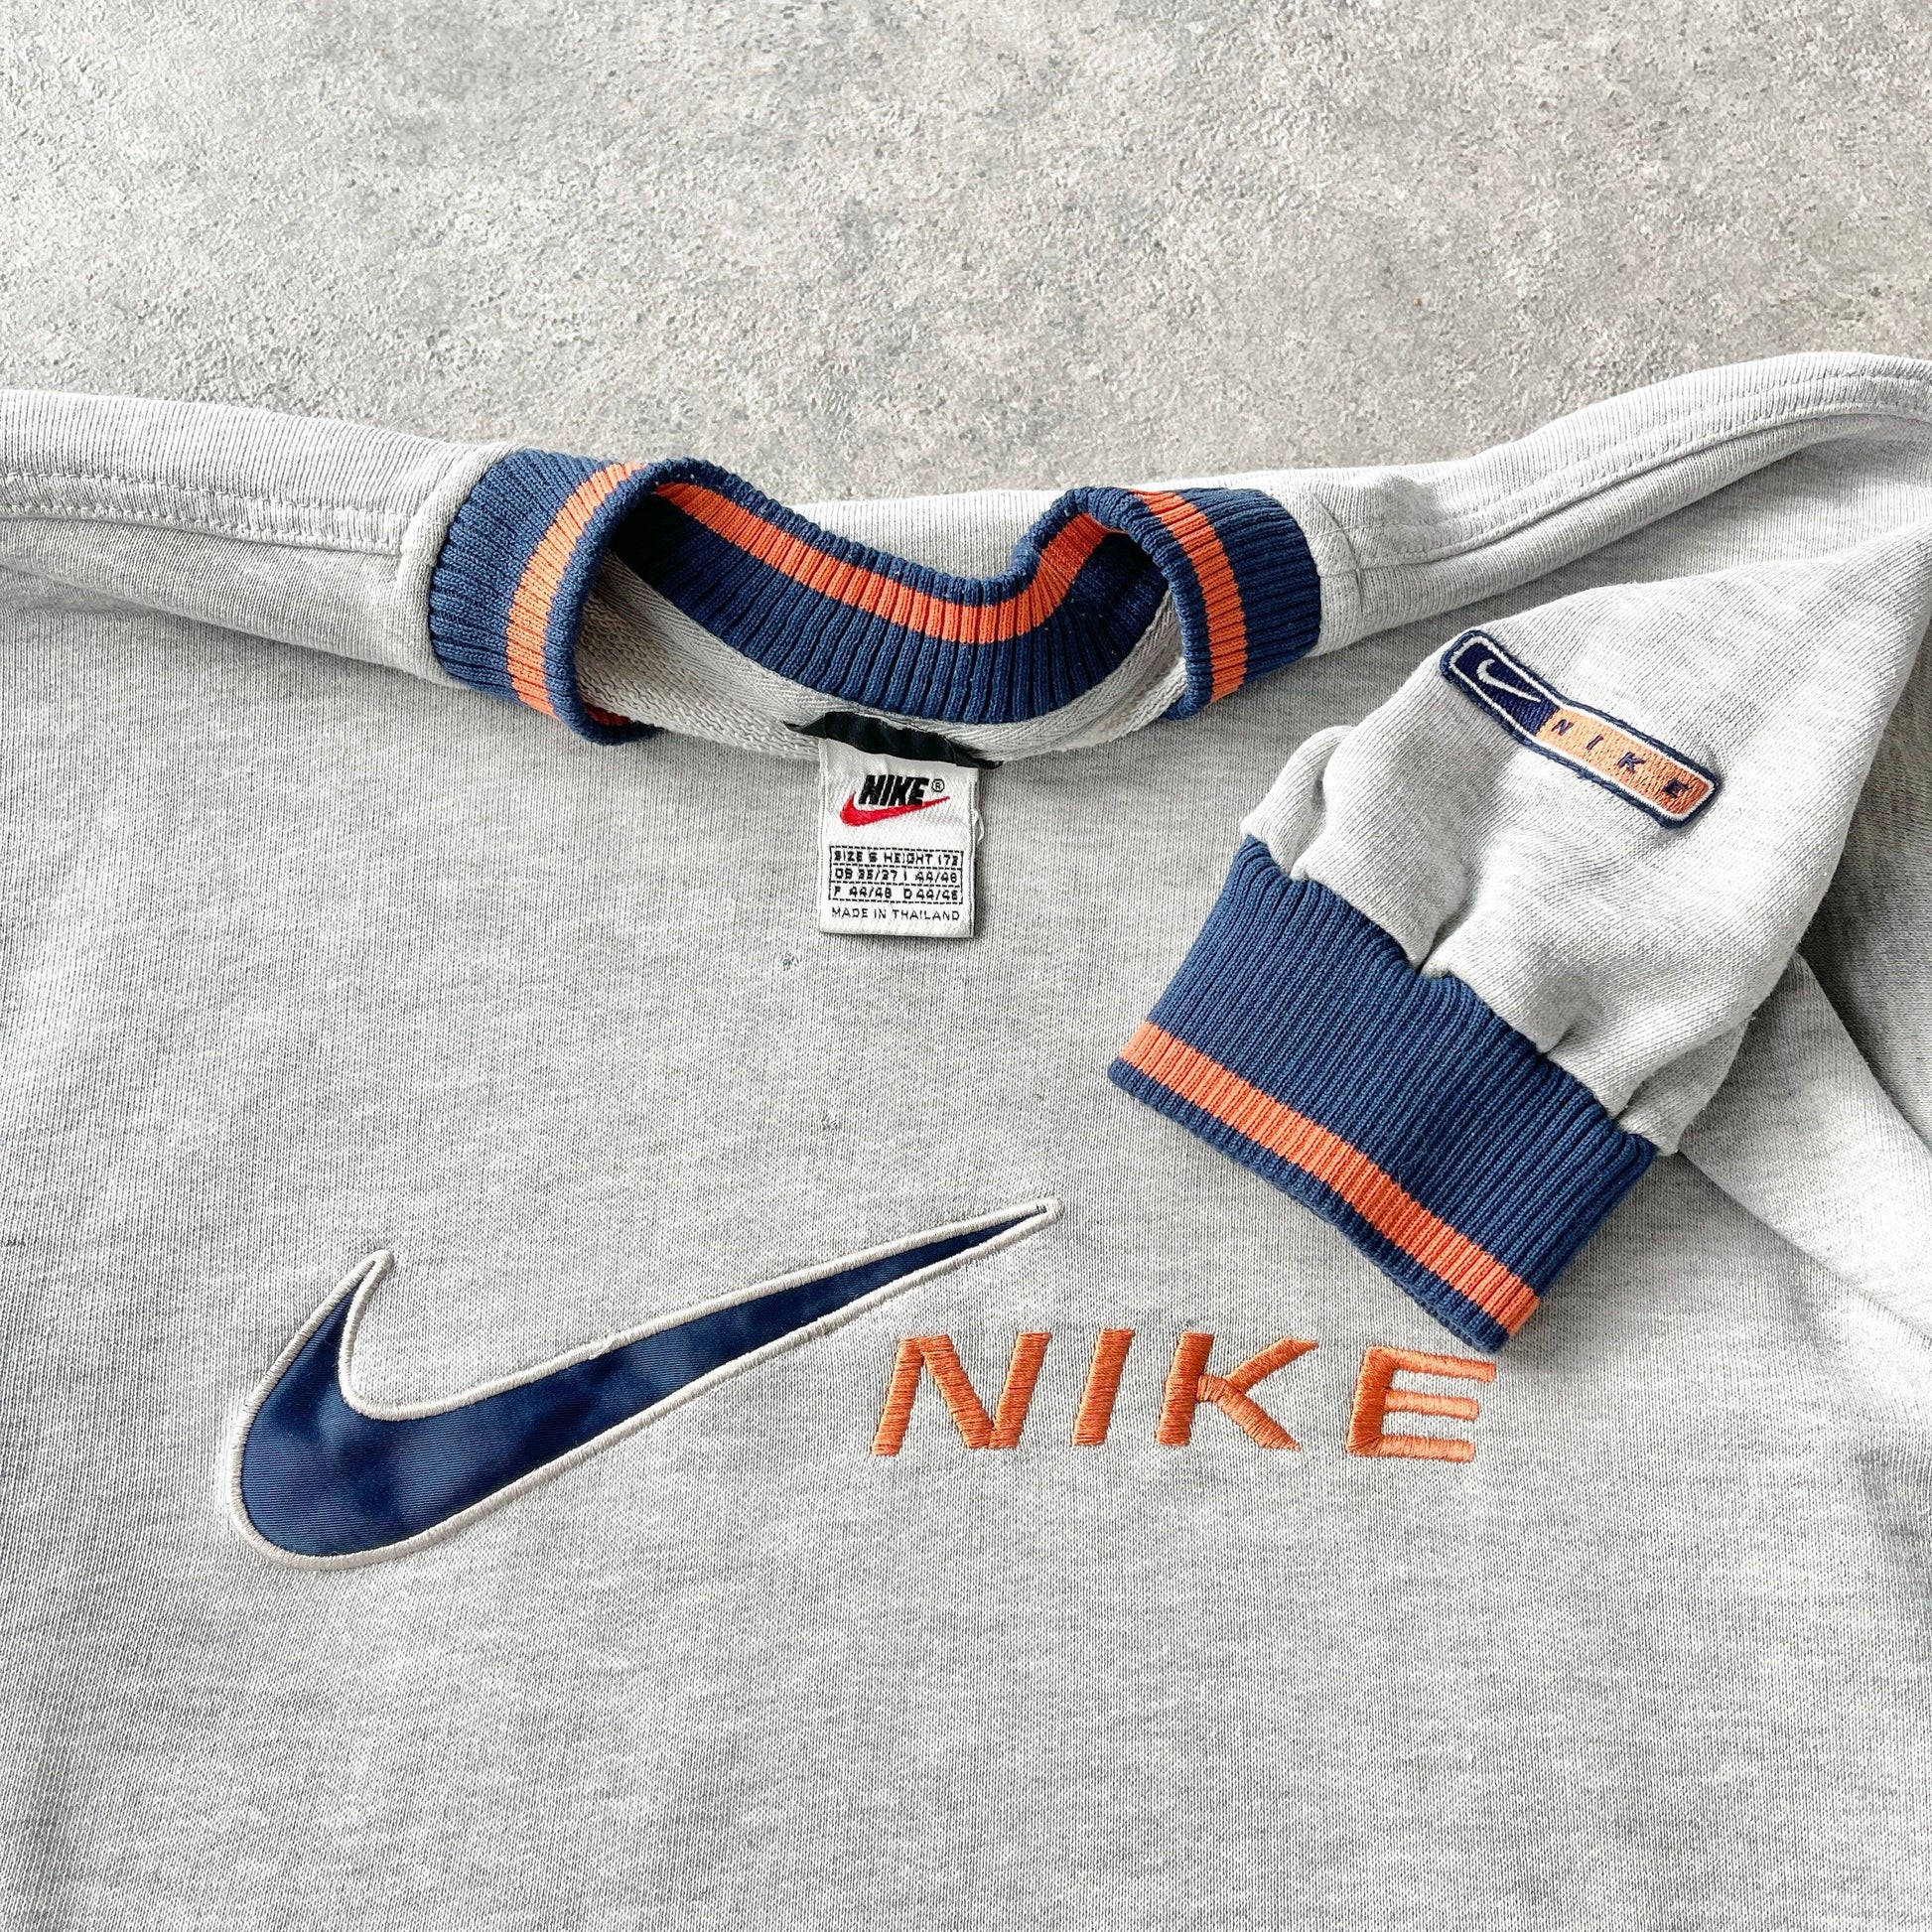 Nike 1990s embroidered spellout sweatshirt (S) - Known Source